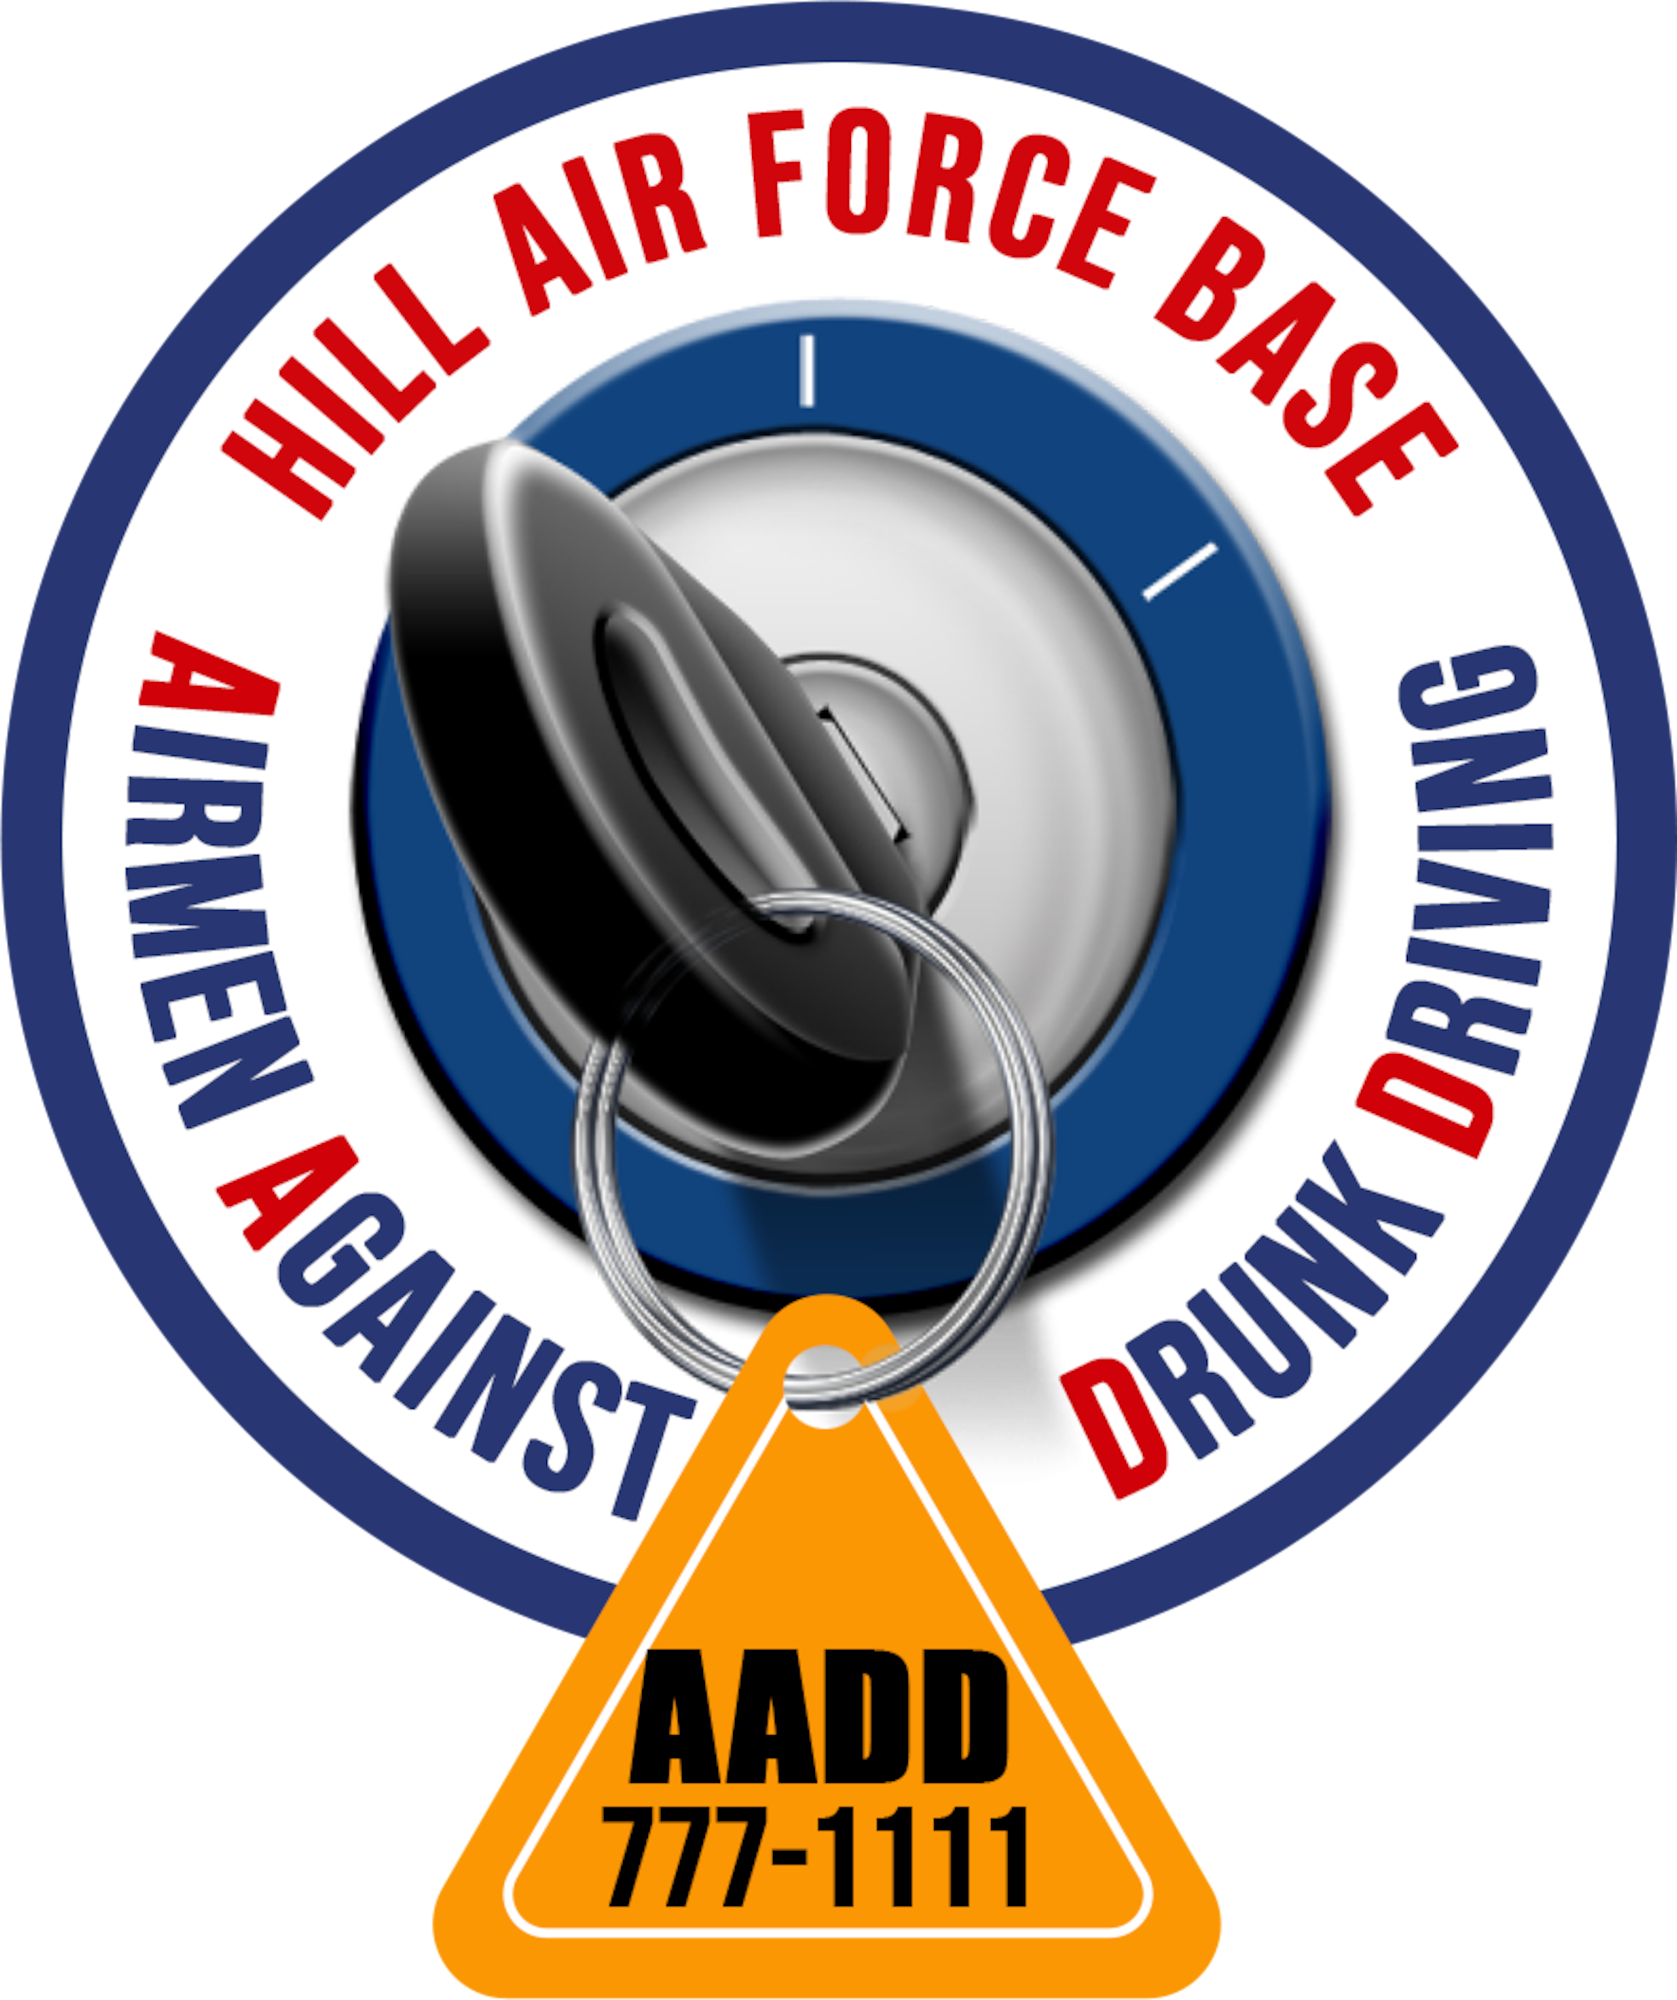 The Airman Against Drunk Driving (AADD) program is restarting May 7. It will run every Friday and Saturday night from 11 p.m. to 3 a.m. AADD is a volunteer organization committed to getting military-affiliated individuals home safely. The free service is open to those with access to Hill AFB including military members of all ranks, dependents, civilians and contractors. The coverage area extends from North Ogden to Salt Lake City. Our goal is to prevent drunk driving. If you need a ride, call 801-777-1111. (U.S. Air Force graphic by Senior Airman Nicholas Geanta)